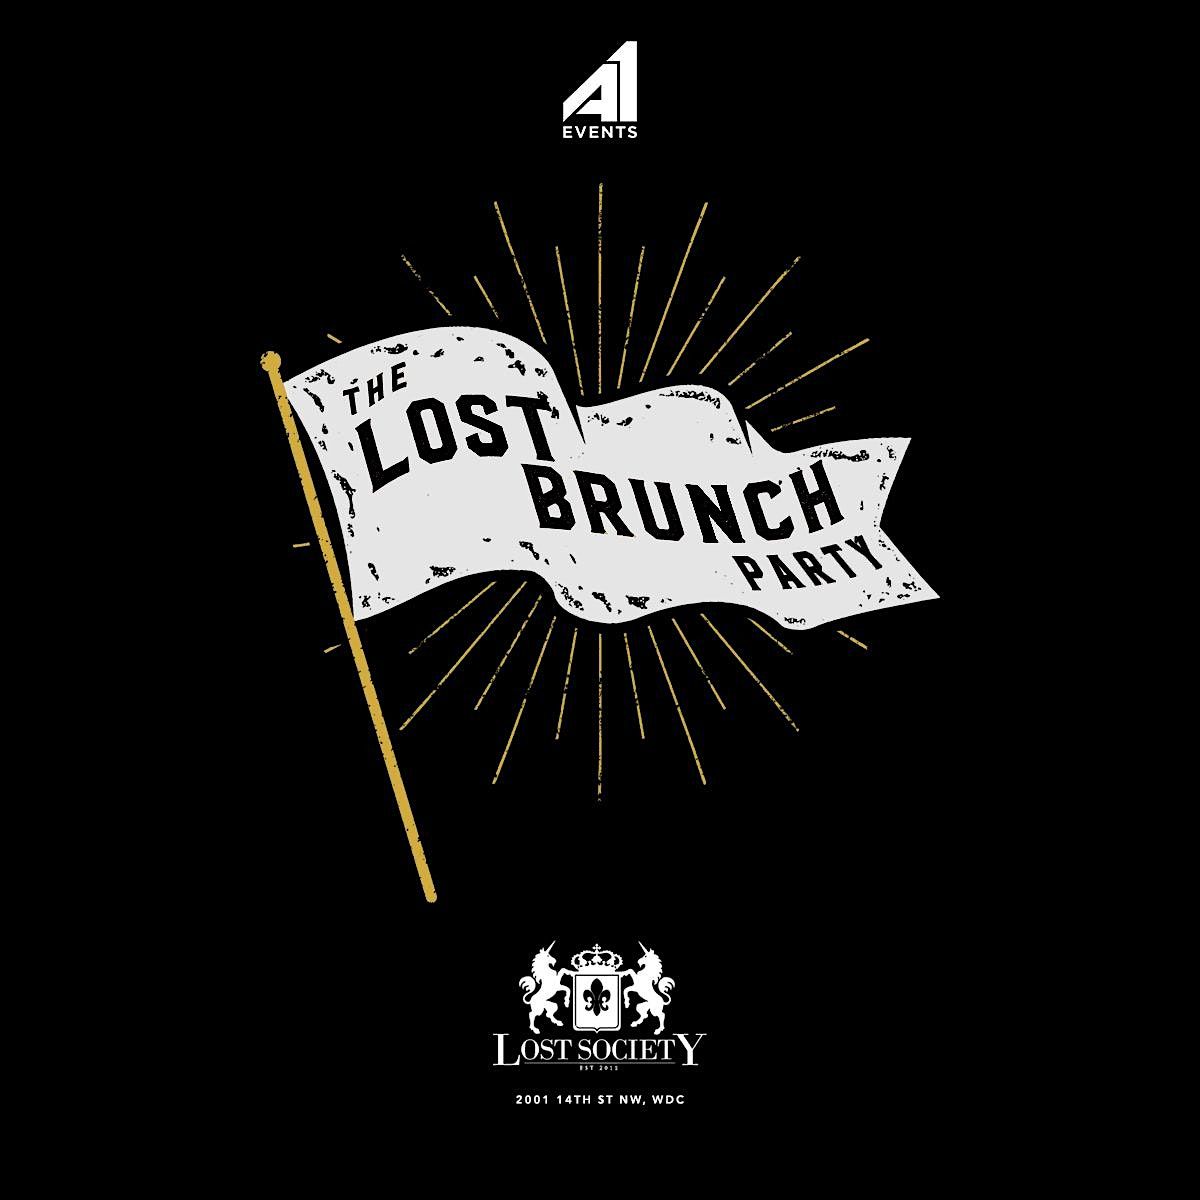 The Lost Society Brunch & Day Party